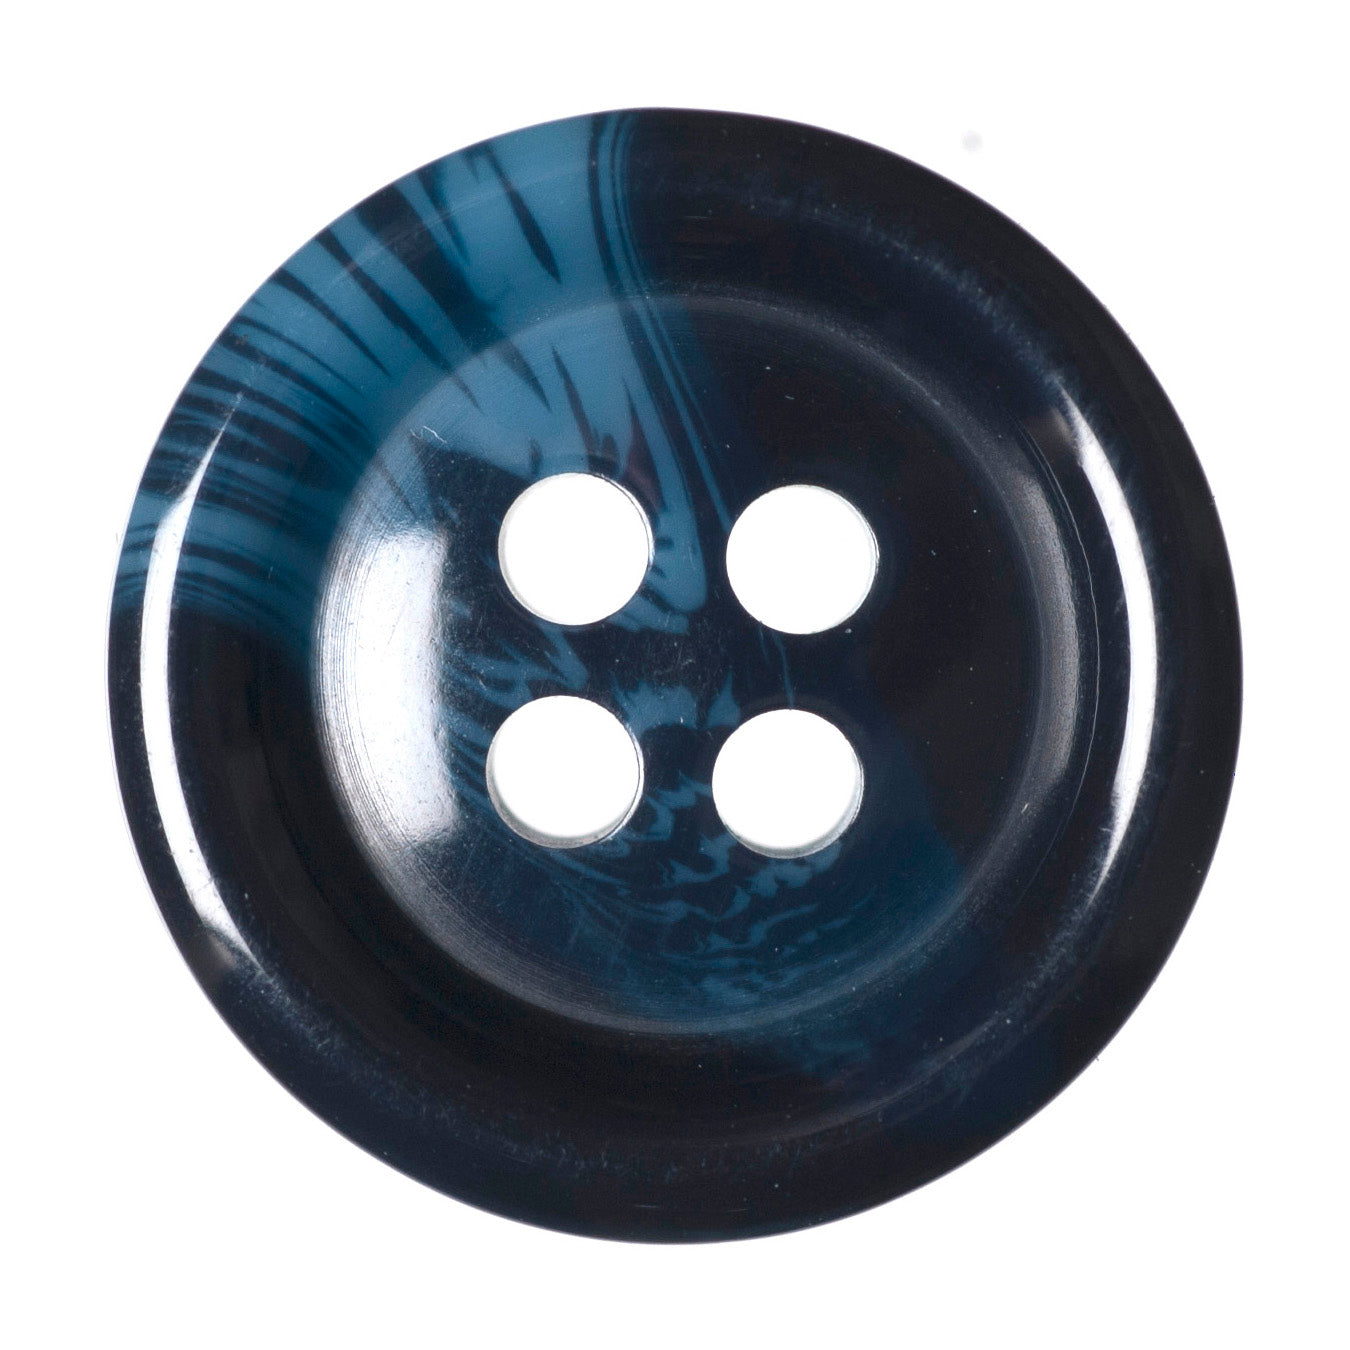 4 Hole Variegated Jacket Button - 15mm - Navy [LB16.2]